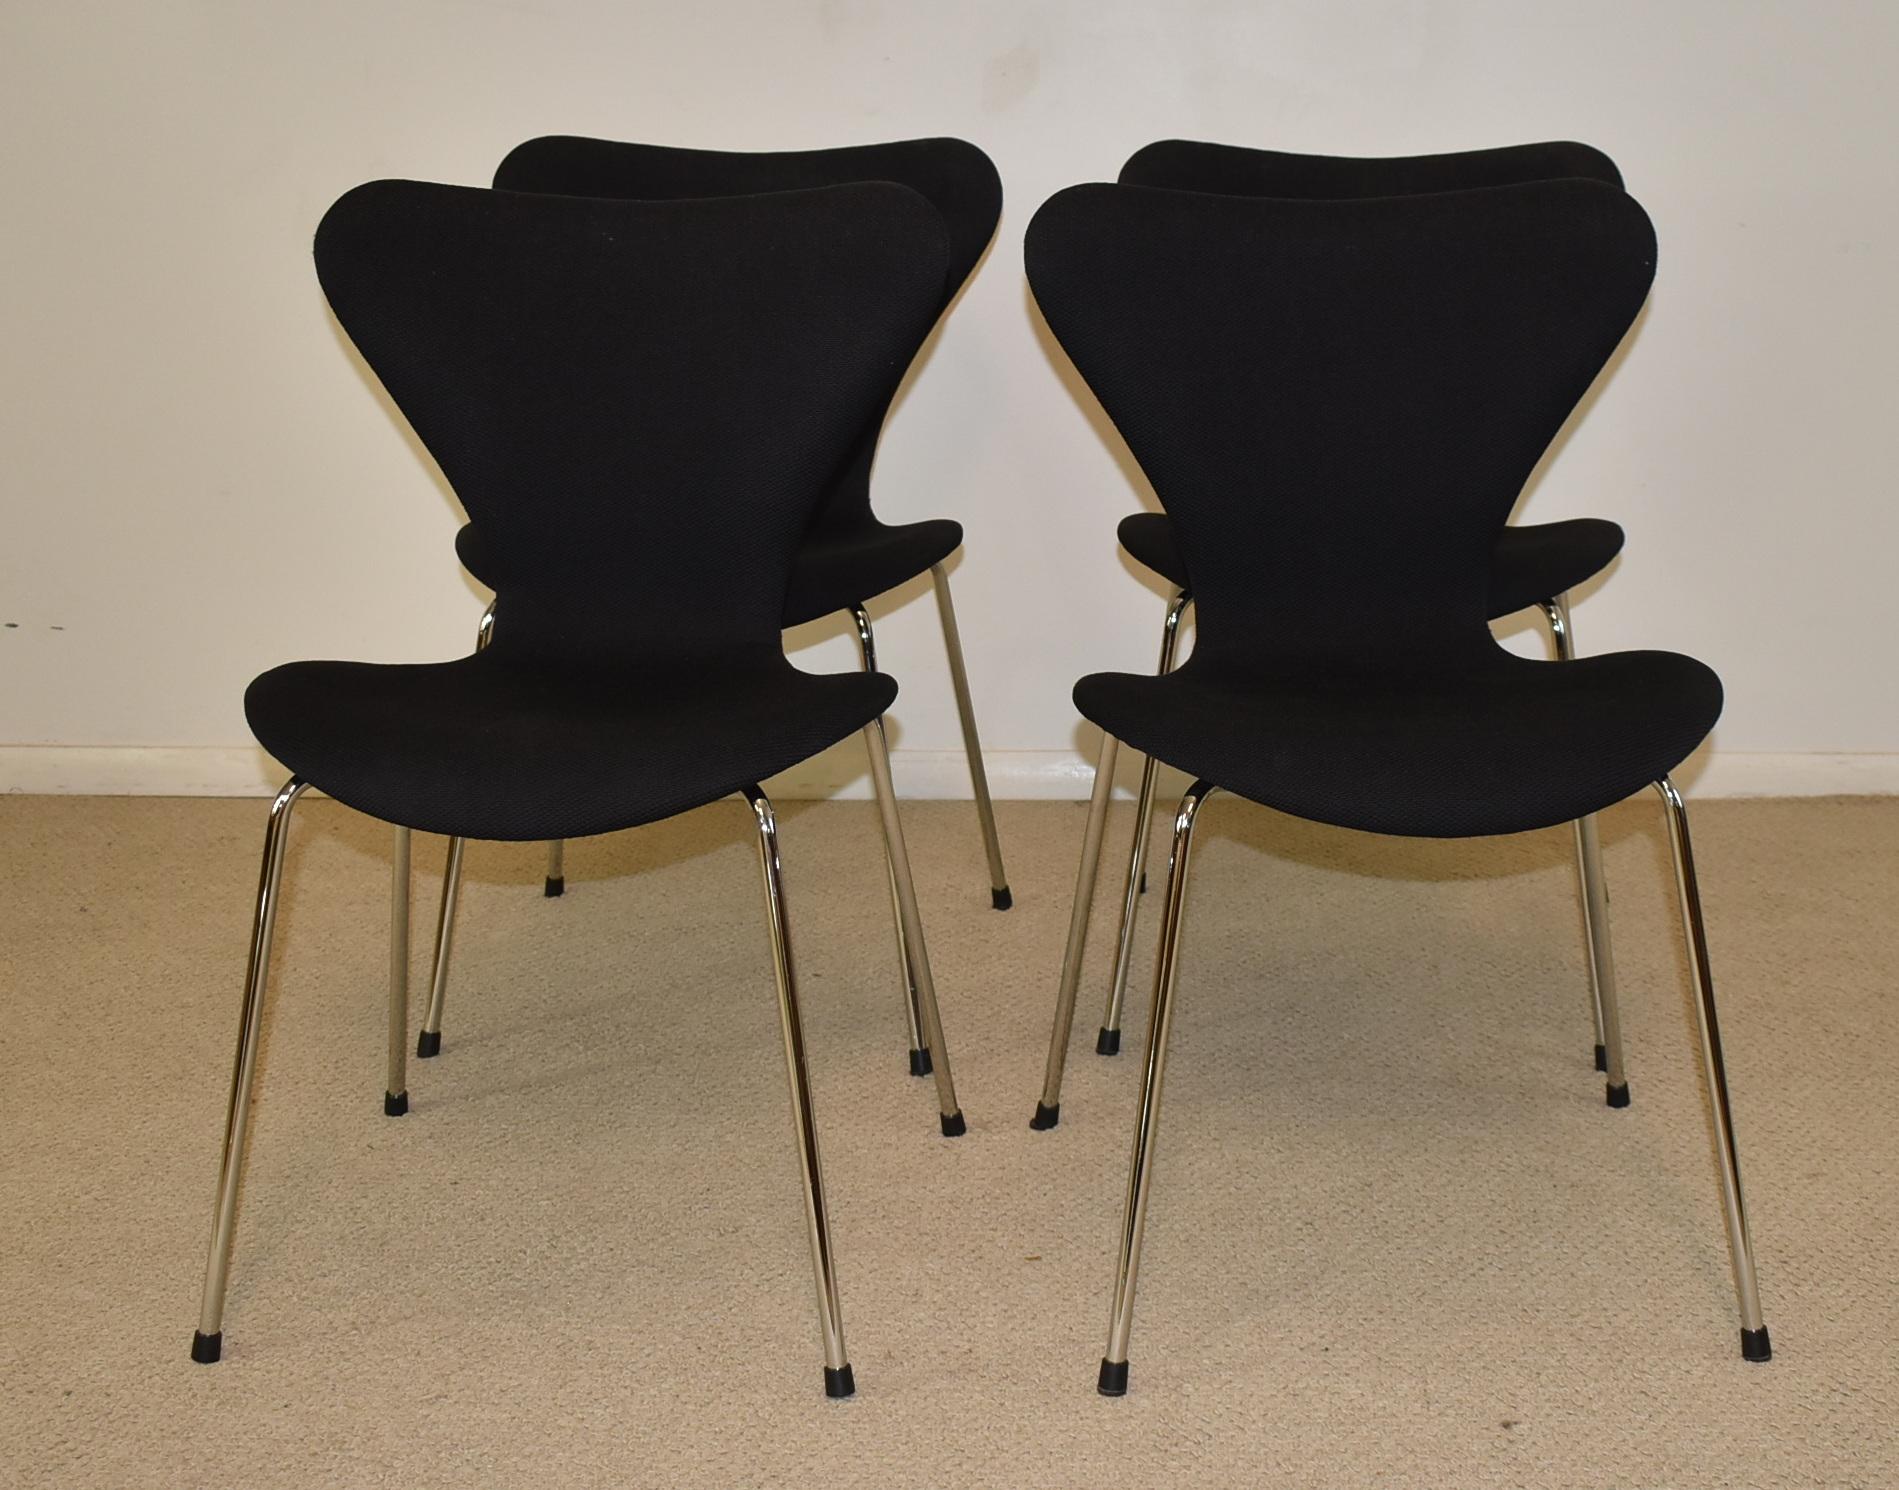 Four Mid-Century Modern chrome and fabric side chairs by Danish designer Fritz Hanson. Some light wear. No pitting in the chrome. Dimensions: 20.48